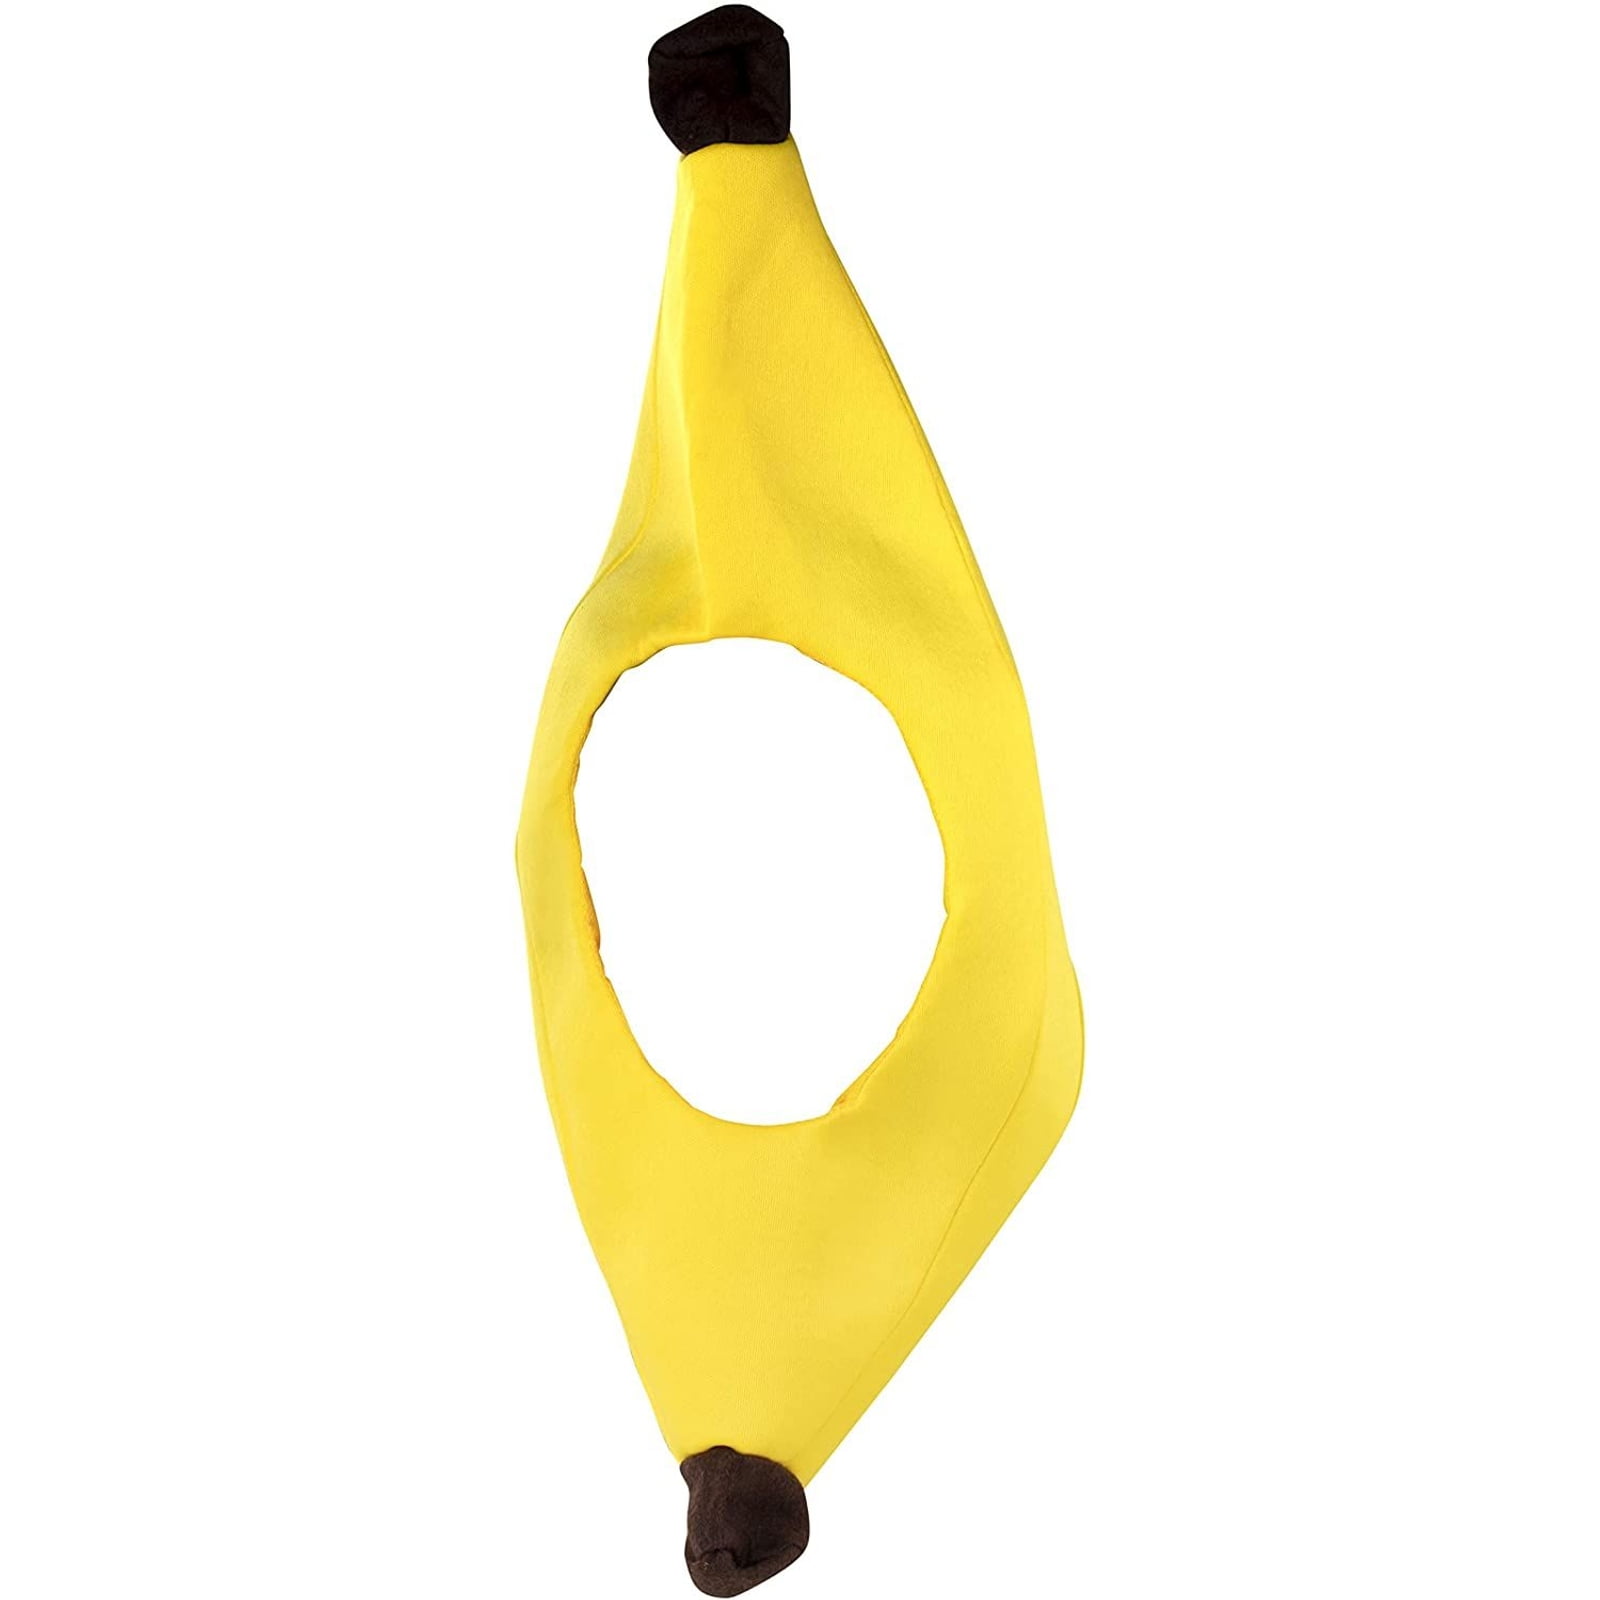 LUOZZY Banana Shape Hat Funny Cosplay Party Hat Performance Props Mr Banana Costume Hat Halloween Party Supplies 